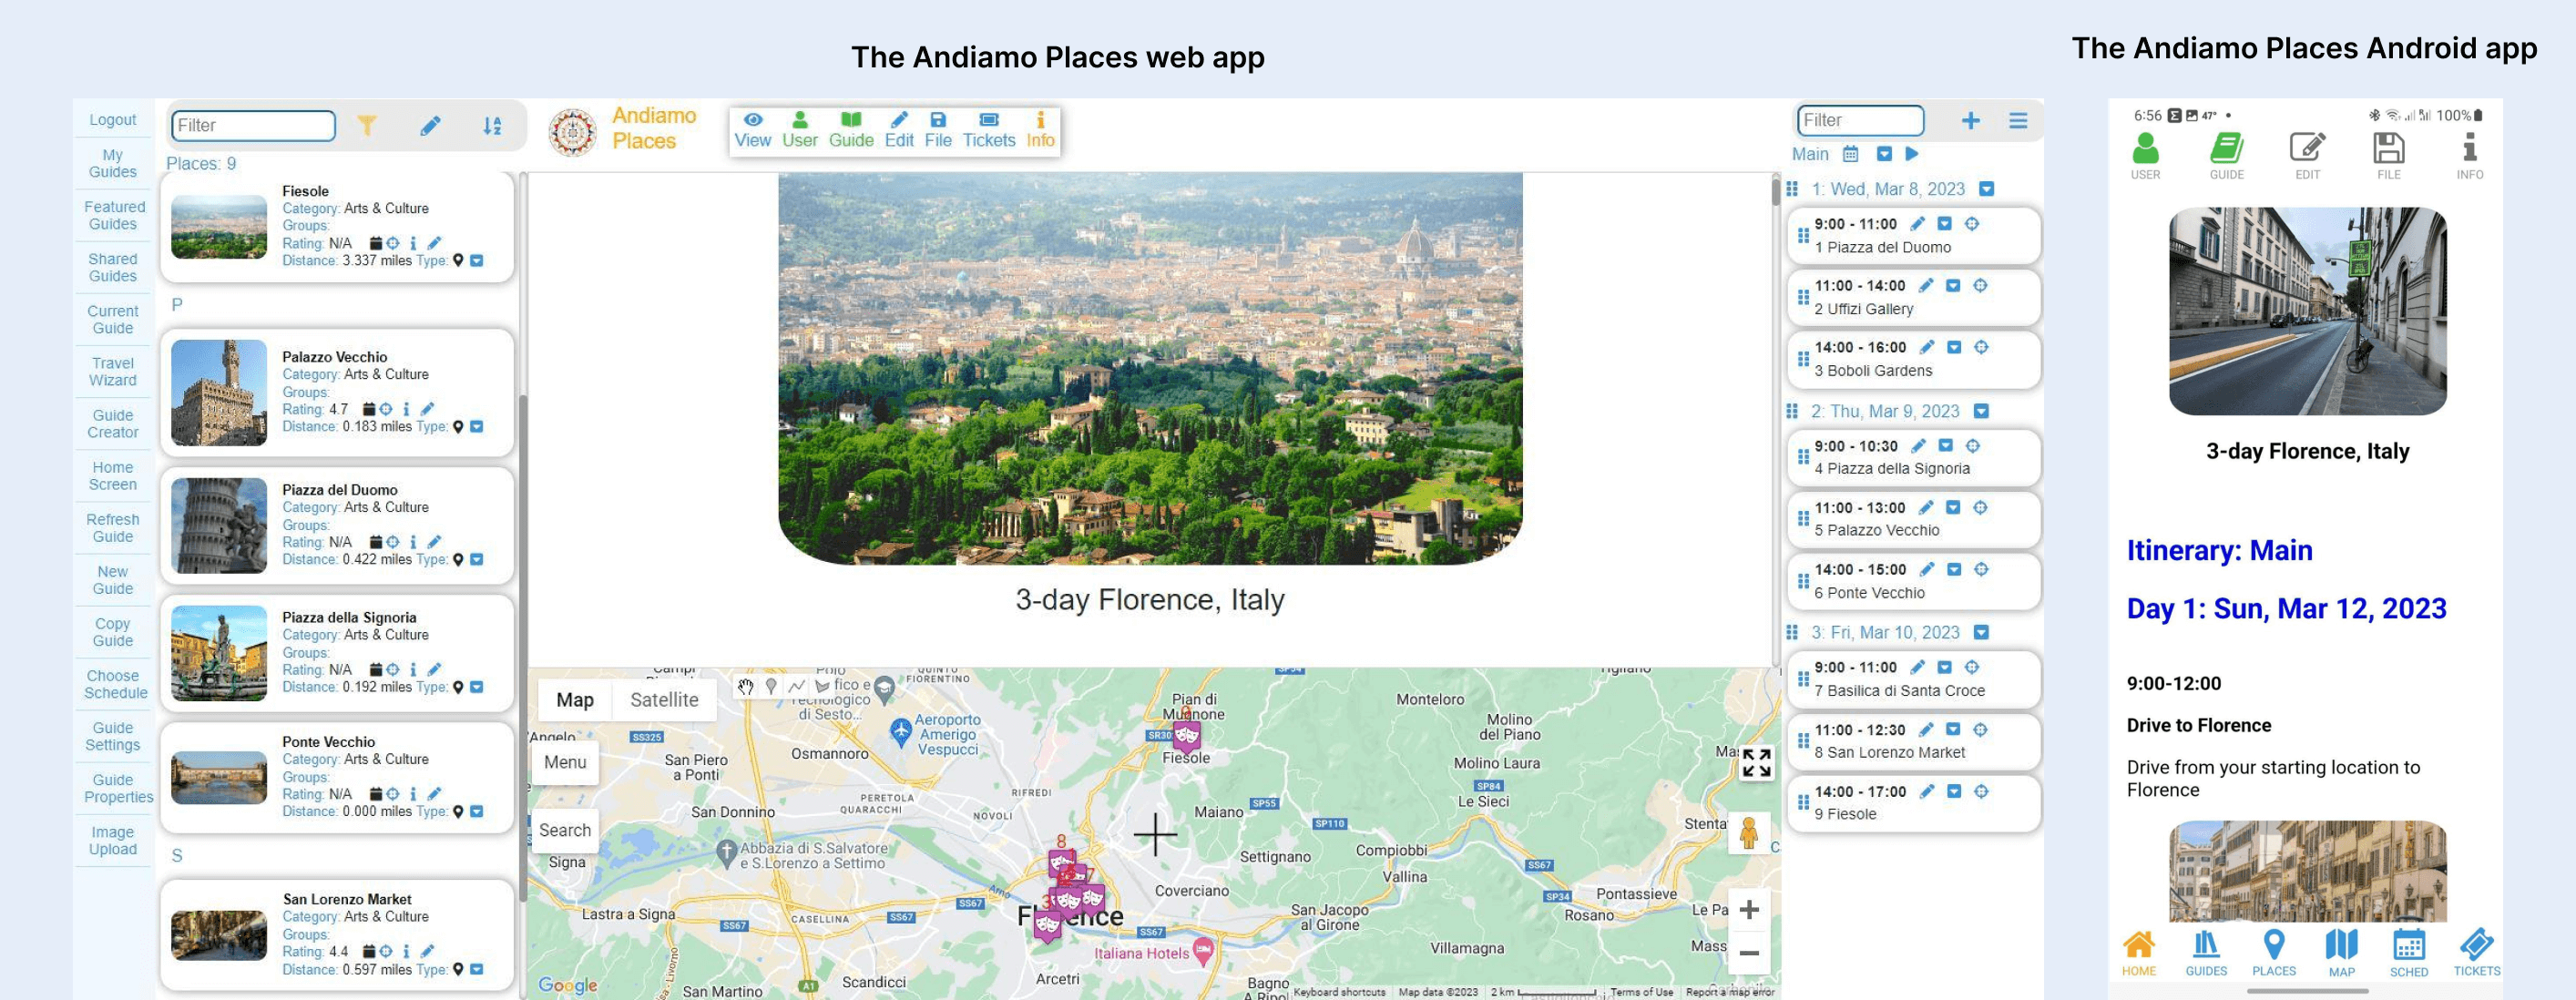 The resulting guide on both the web and mobile versions of the Andiamo Places app